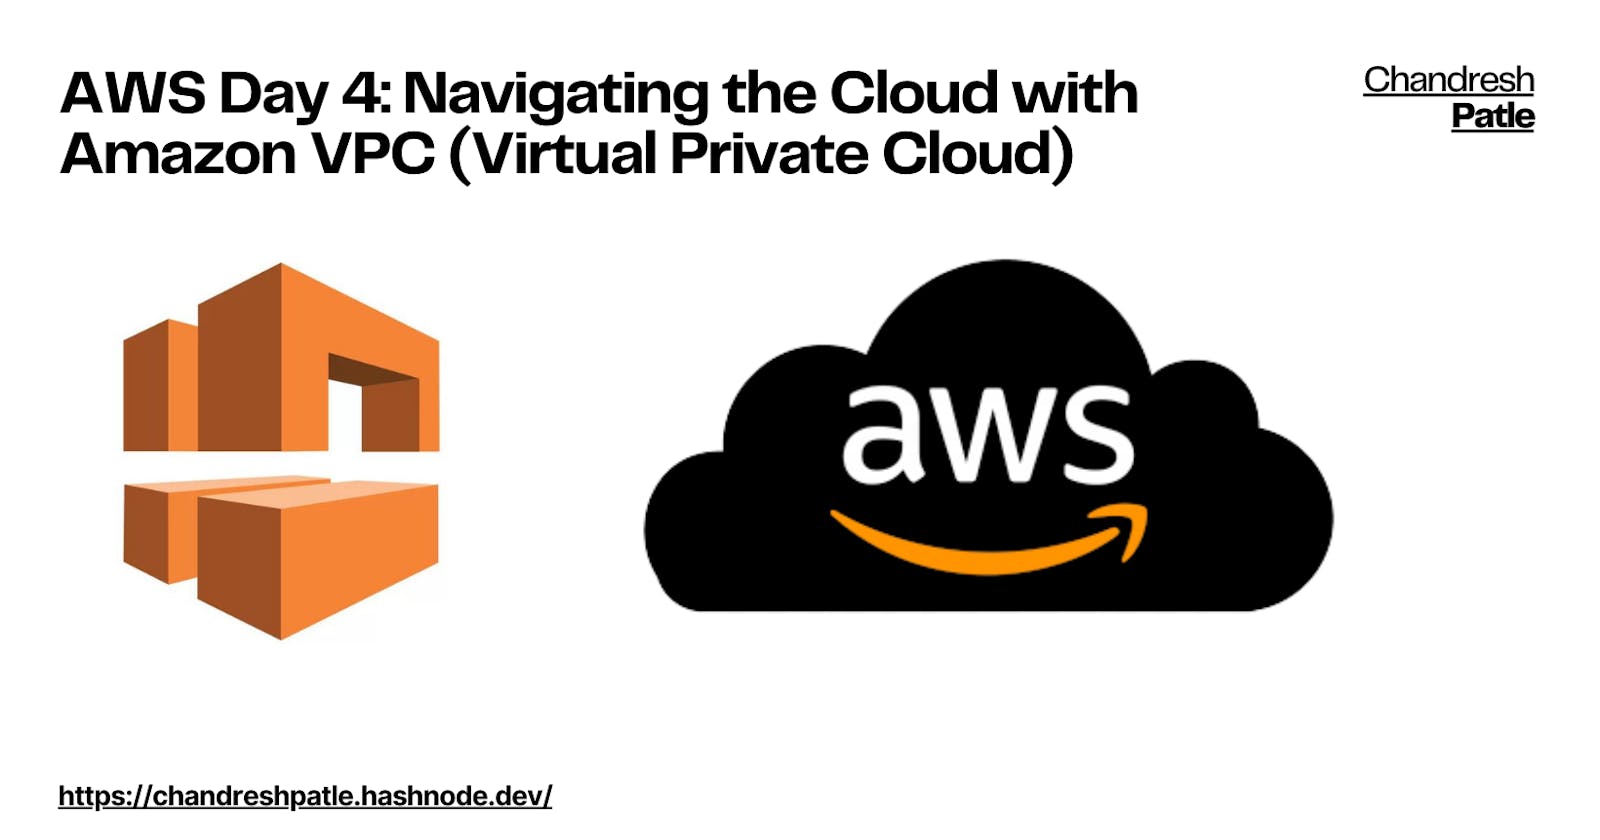 AWS Day 4: Navigating the Cloud with Amazon VPC (Virtual Private Cloud)